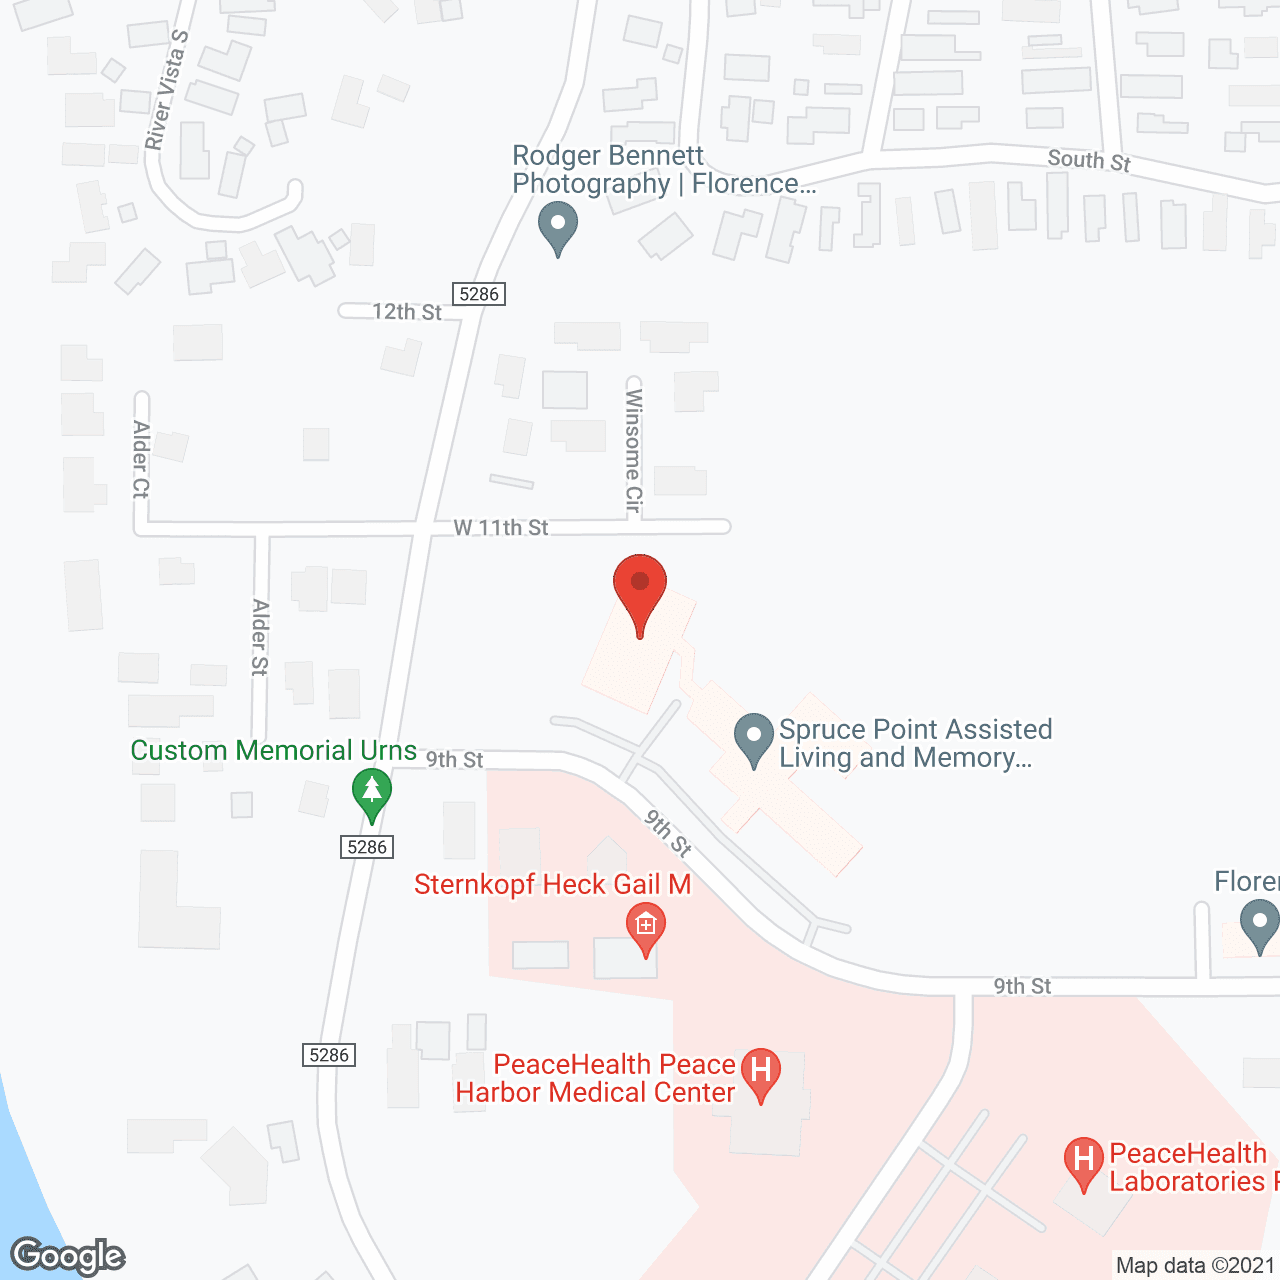 Spruce Point Assisted Living in google map